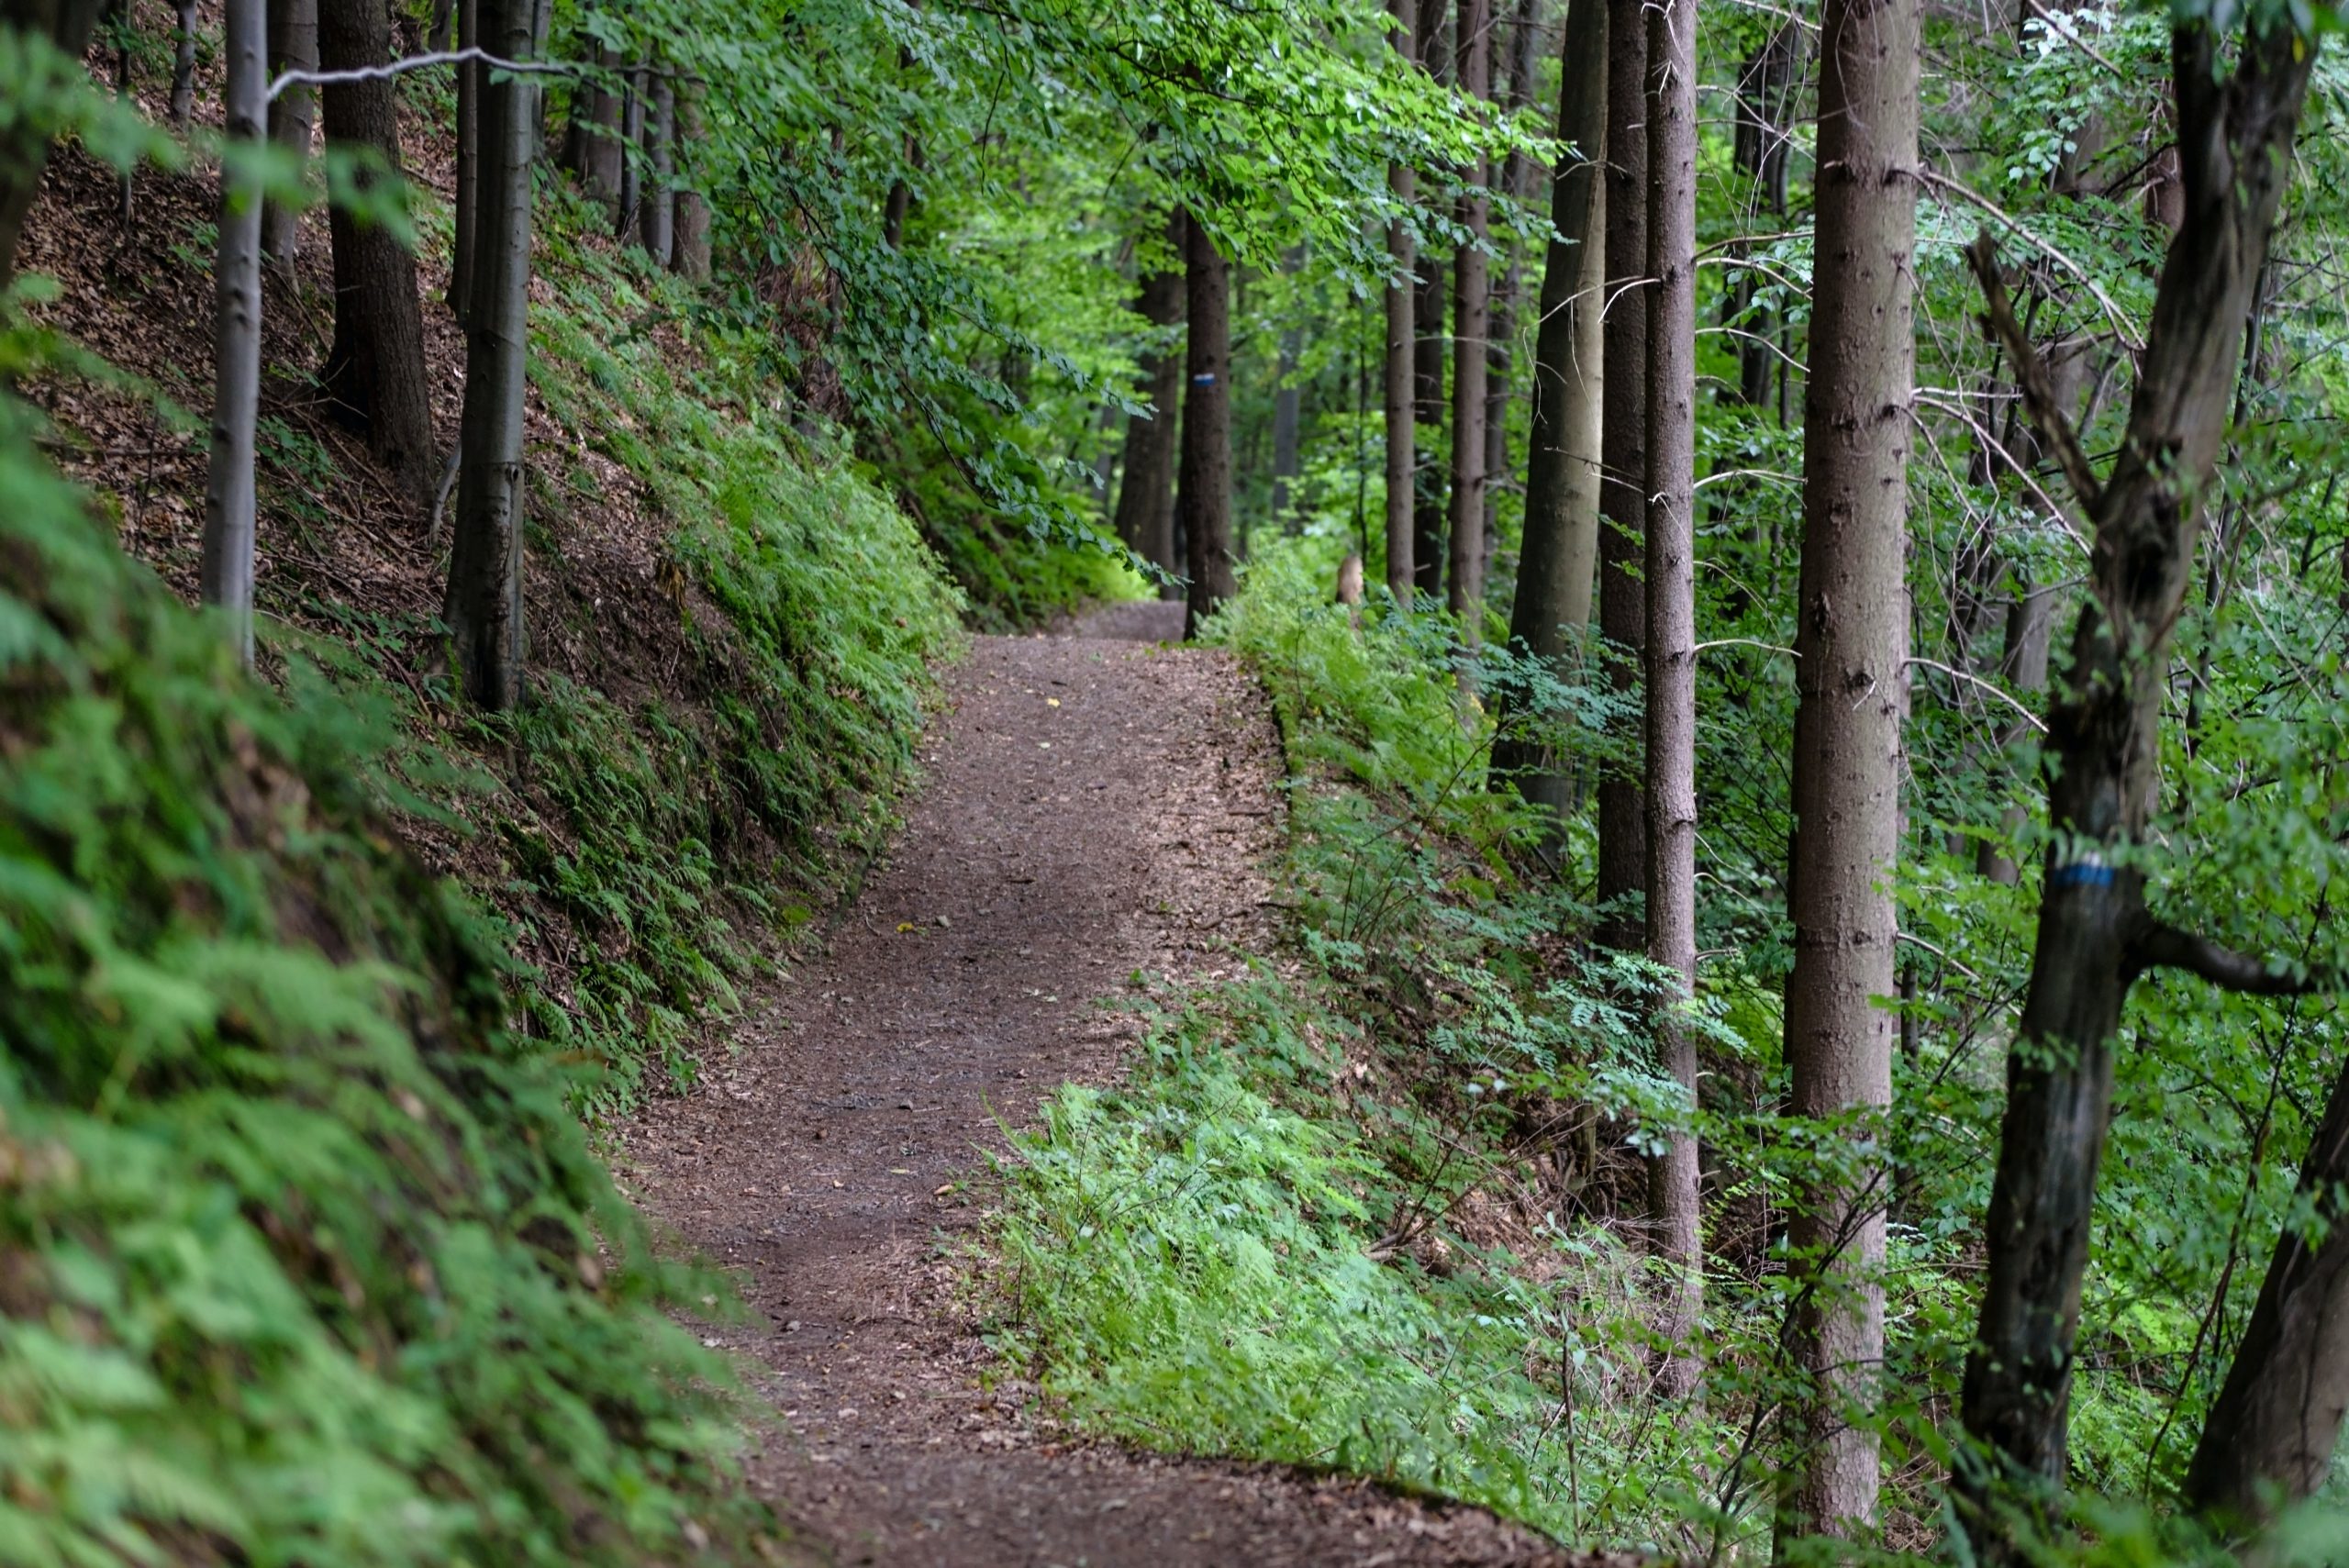 A wooded trail